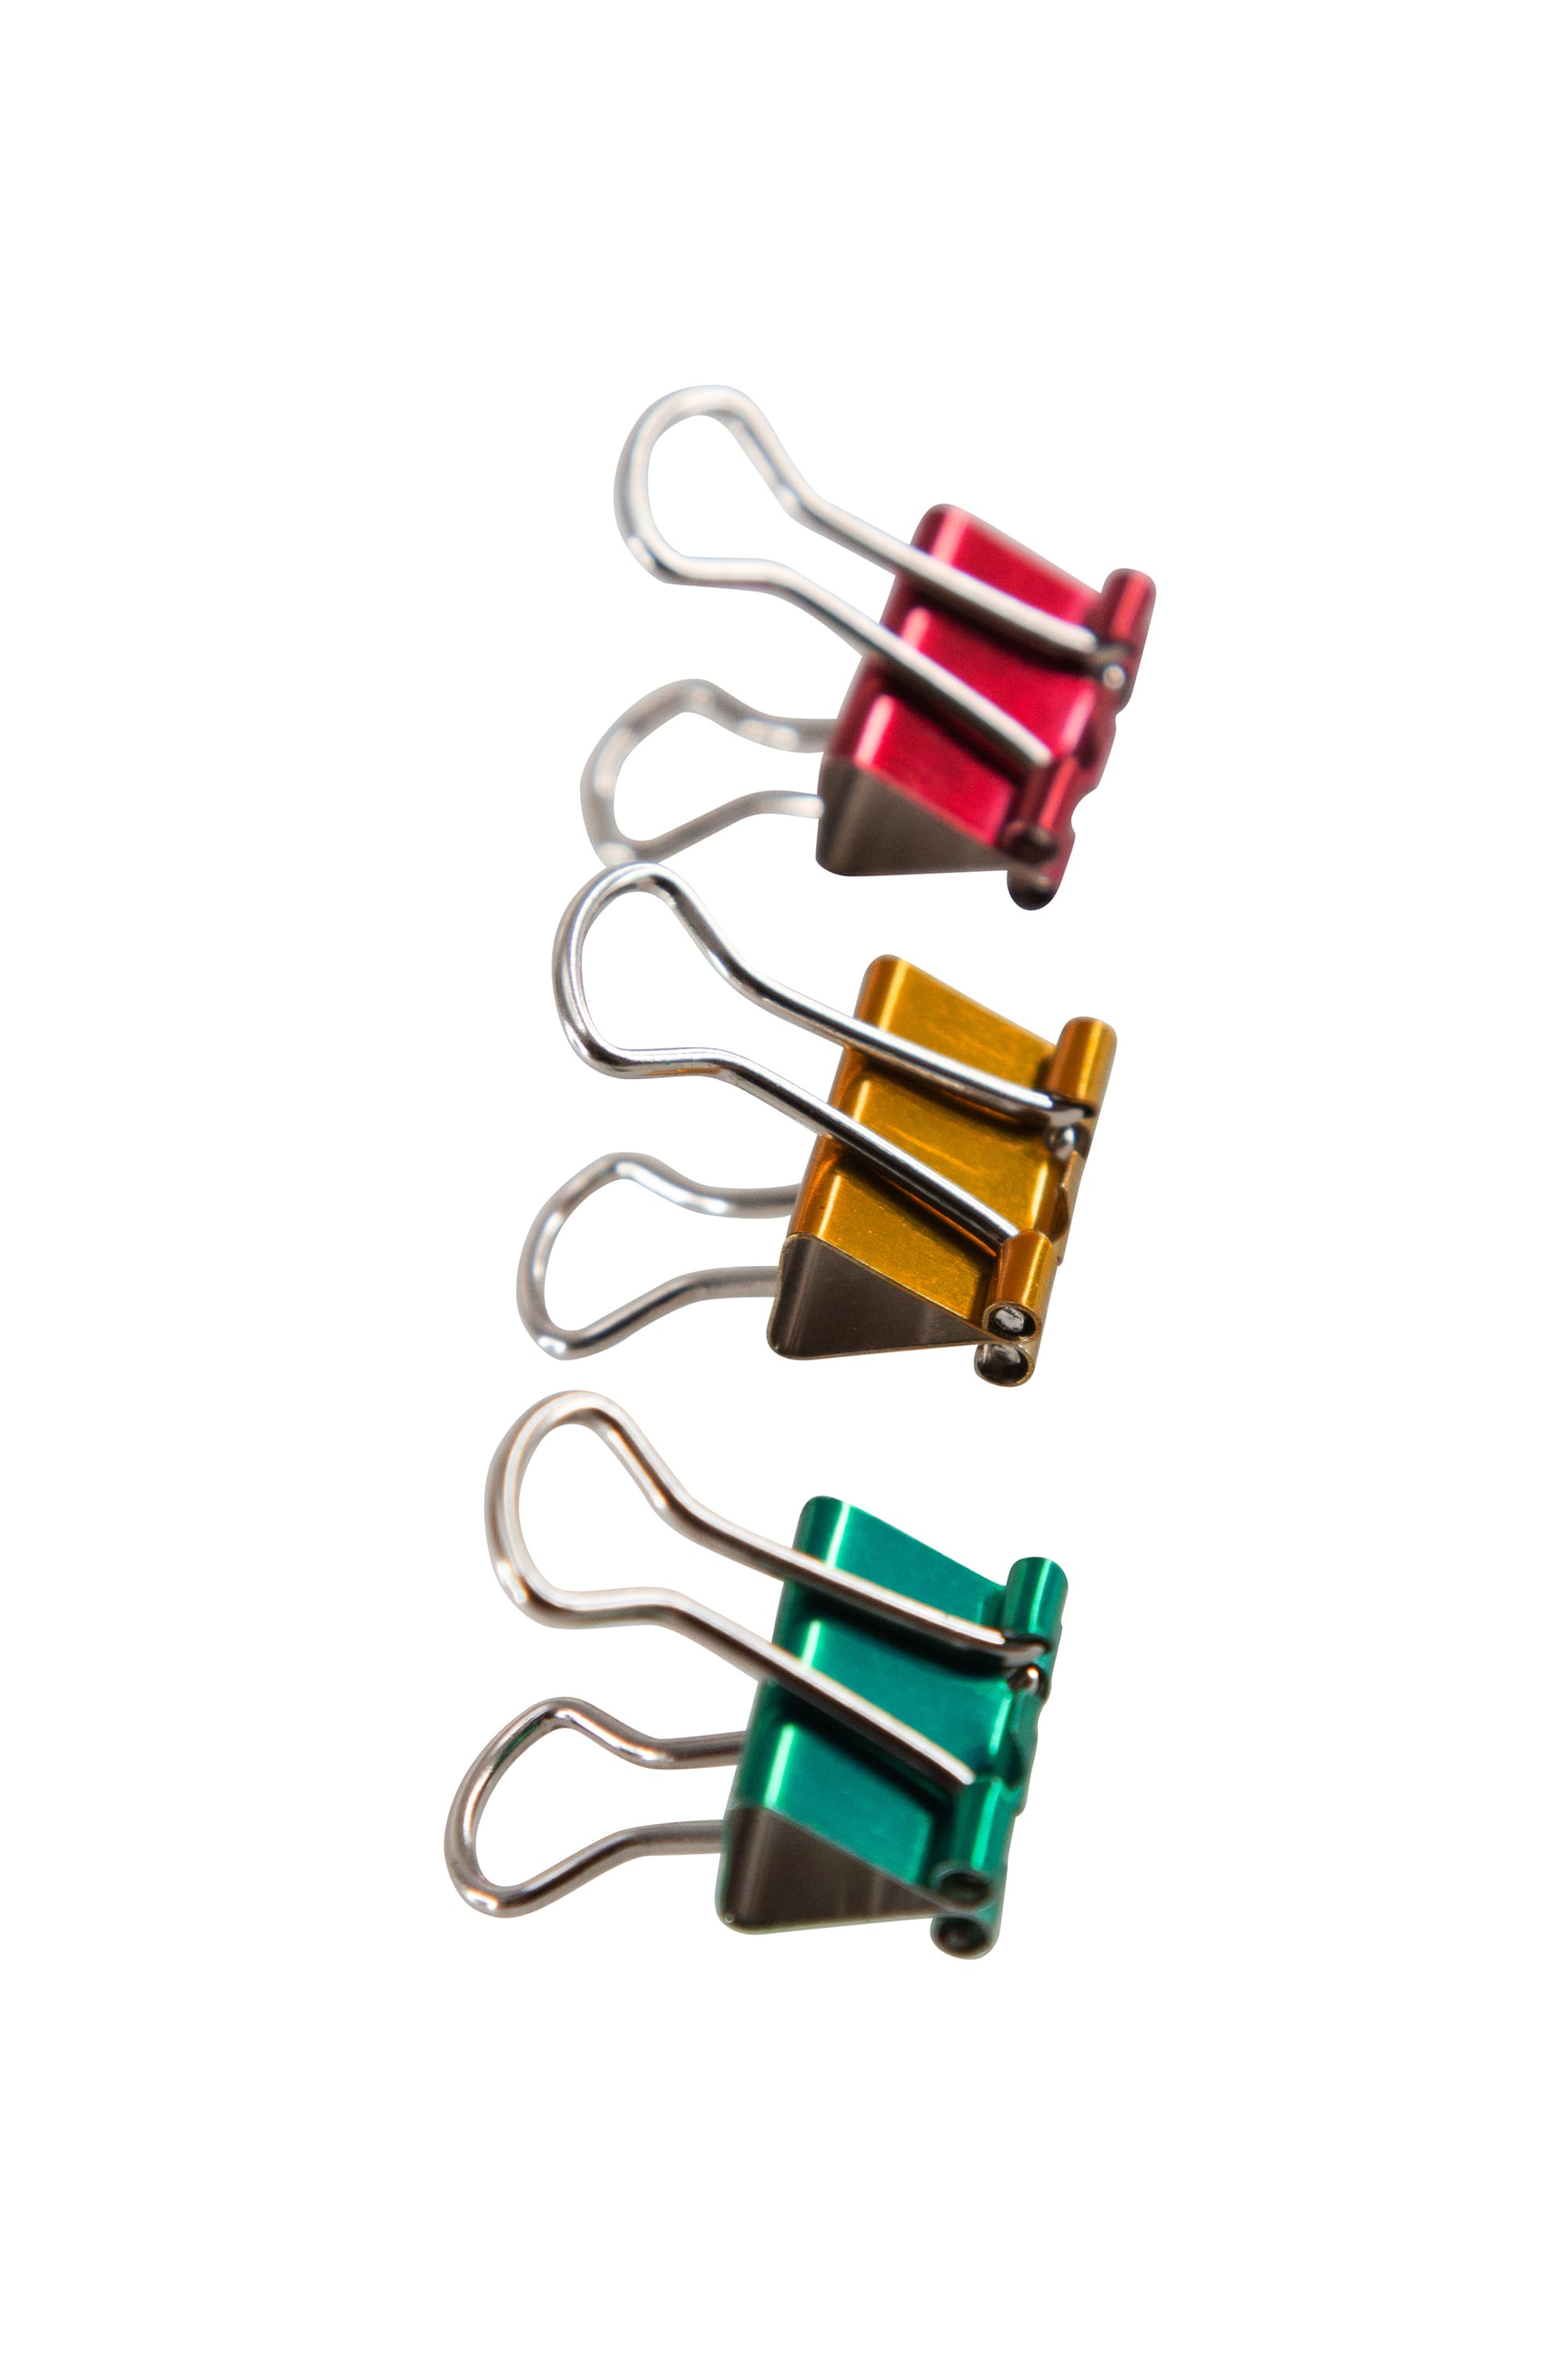 Magnetic Mini Clips - 8 PK - Assorted colors